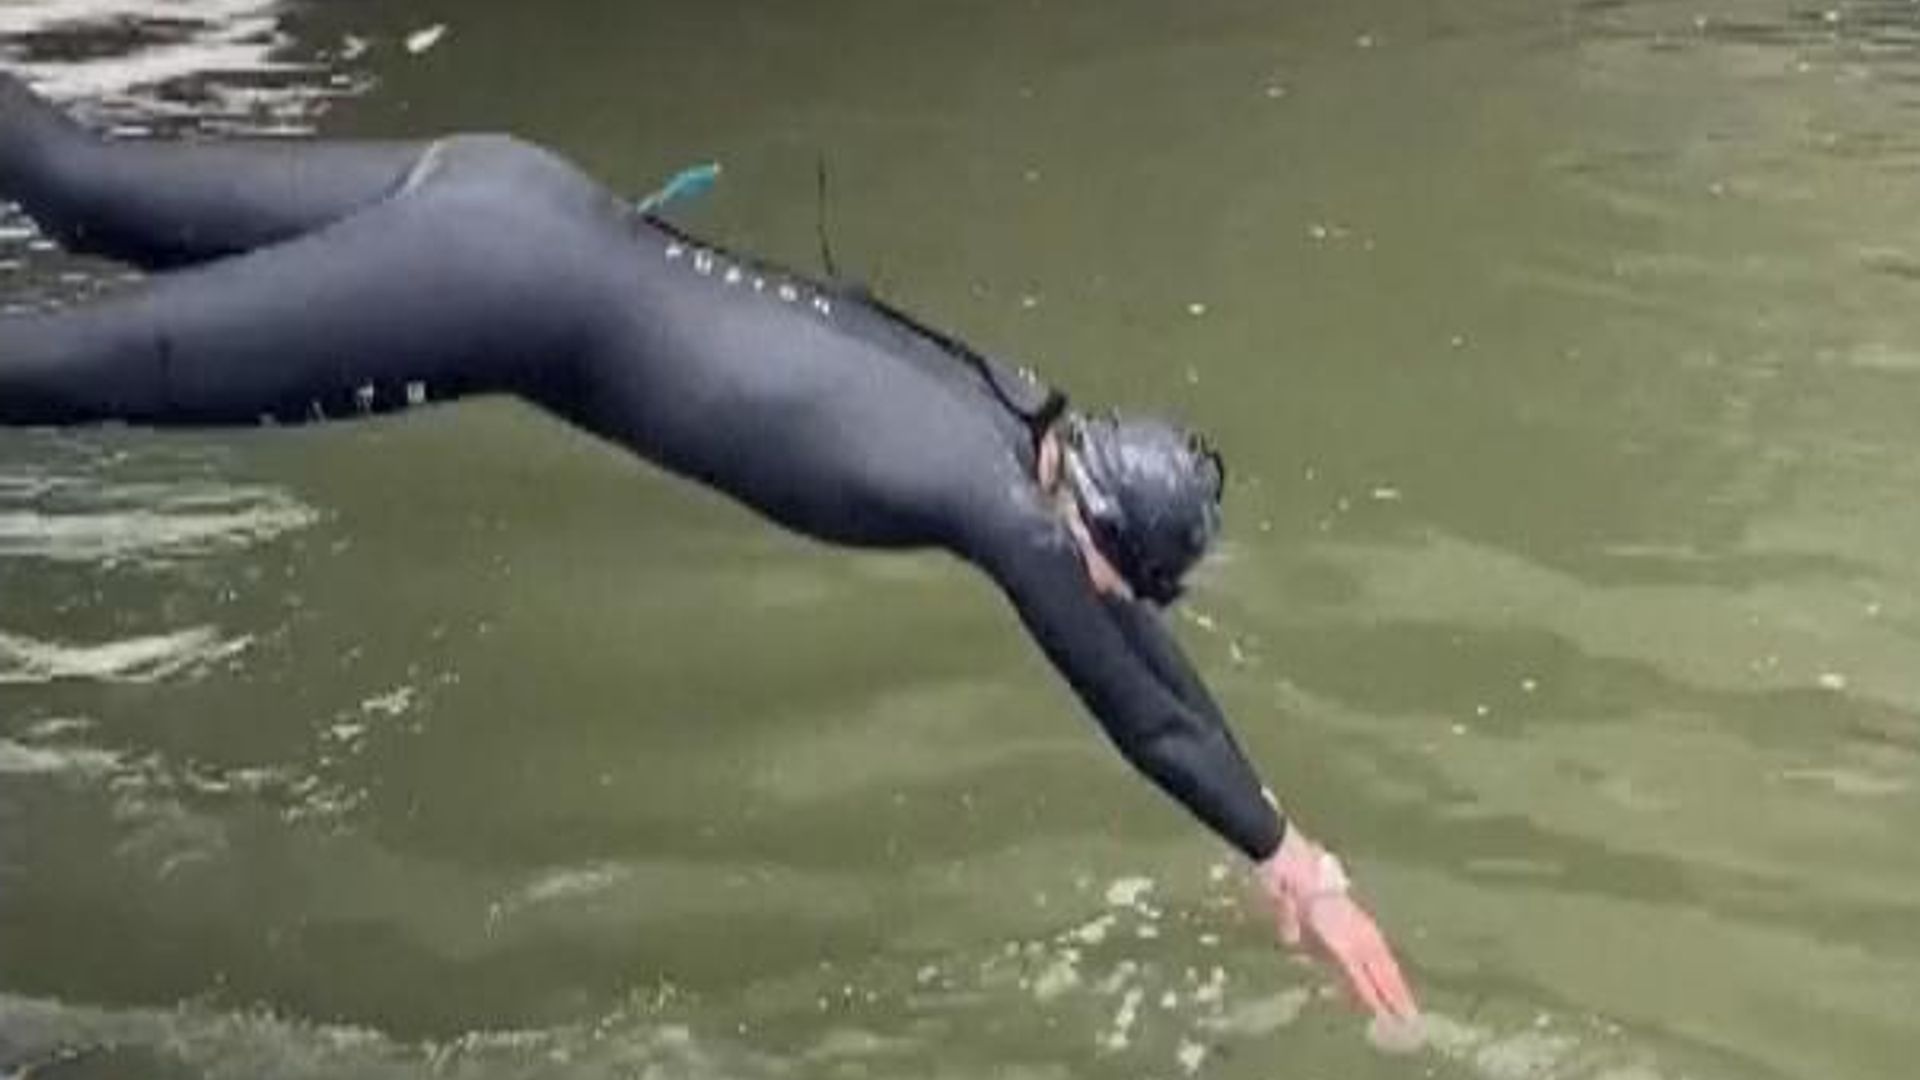 Sports minister swims in Paris river despite unsafe levels of E.coli ahead of Olympics